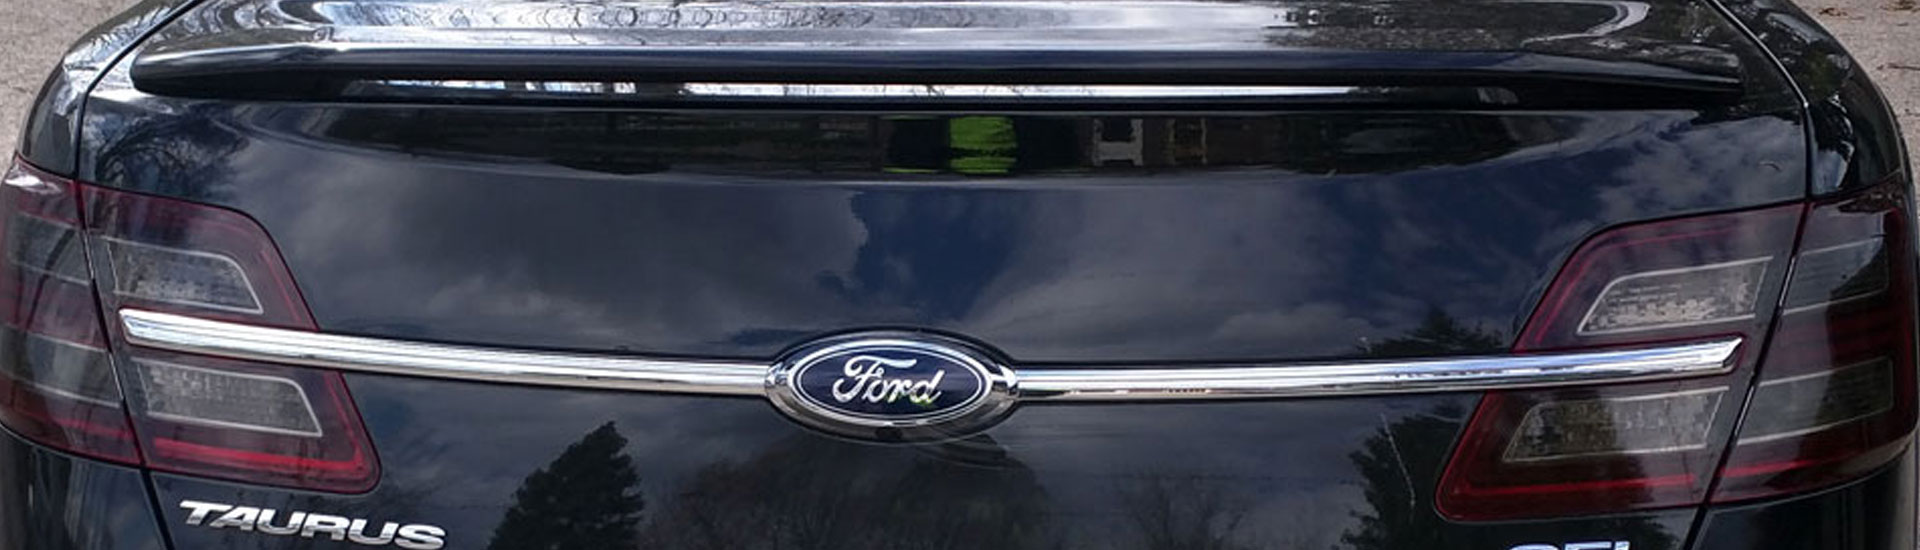 Ford Taurus Tail Light Tint Covers